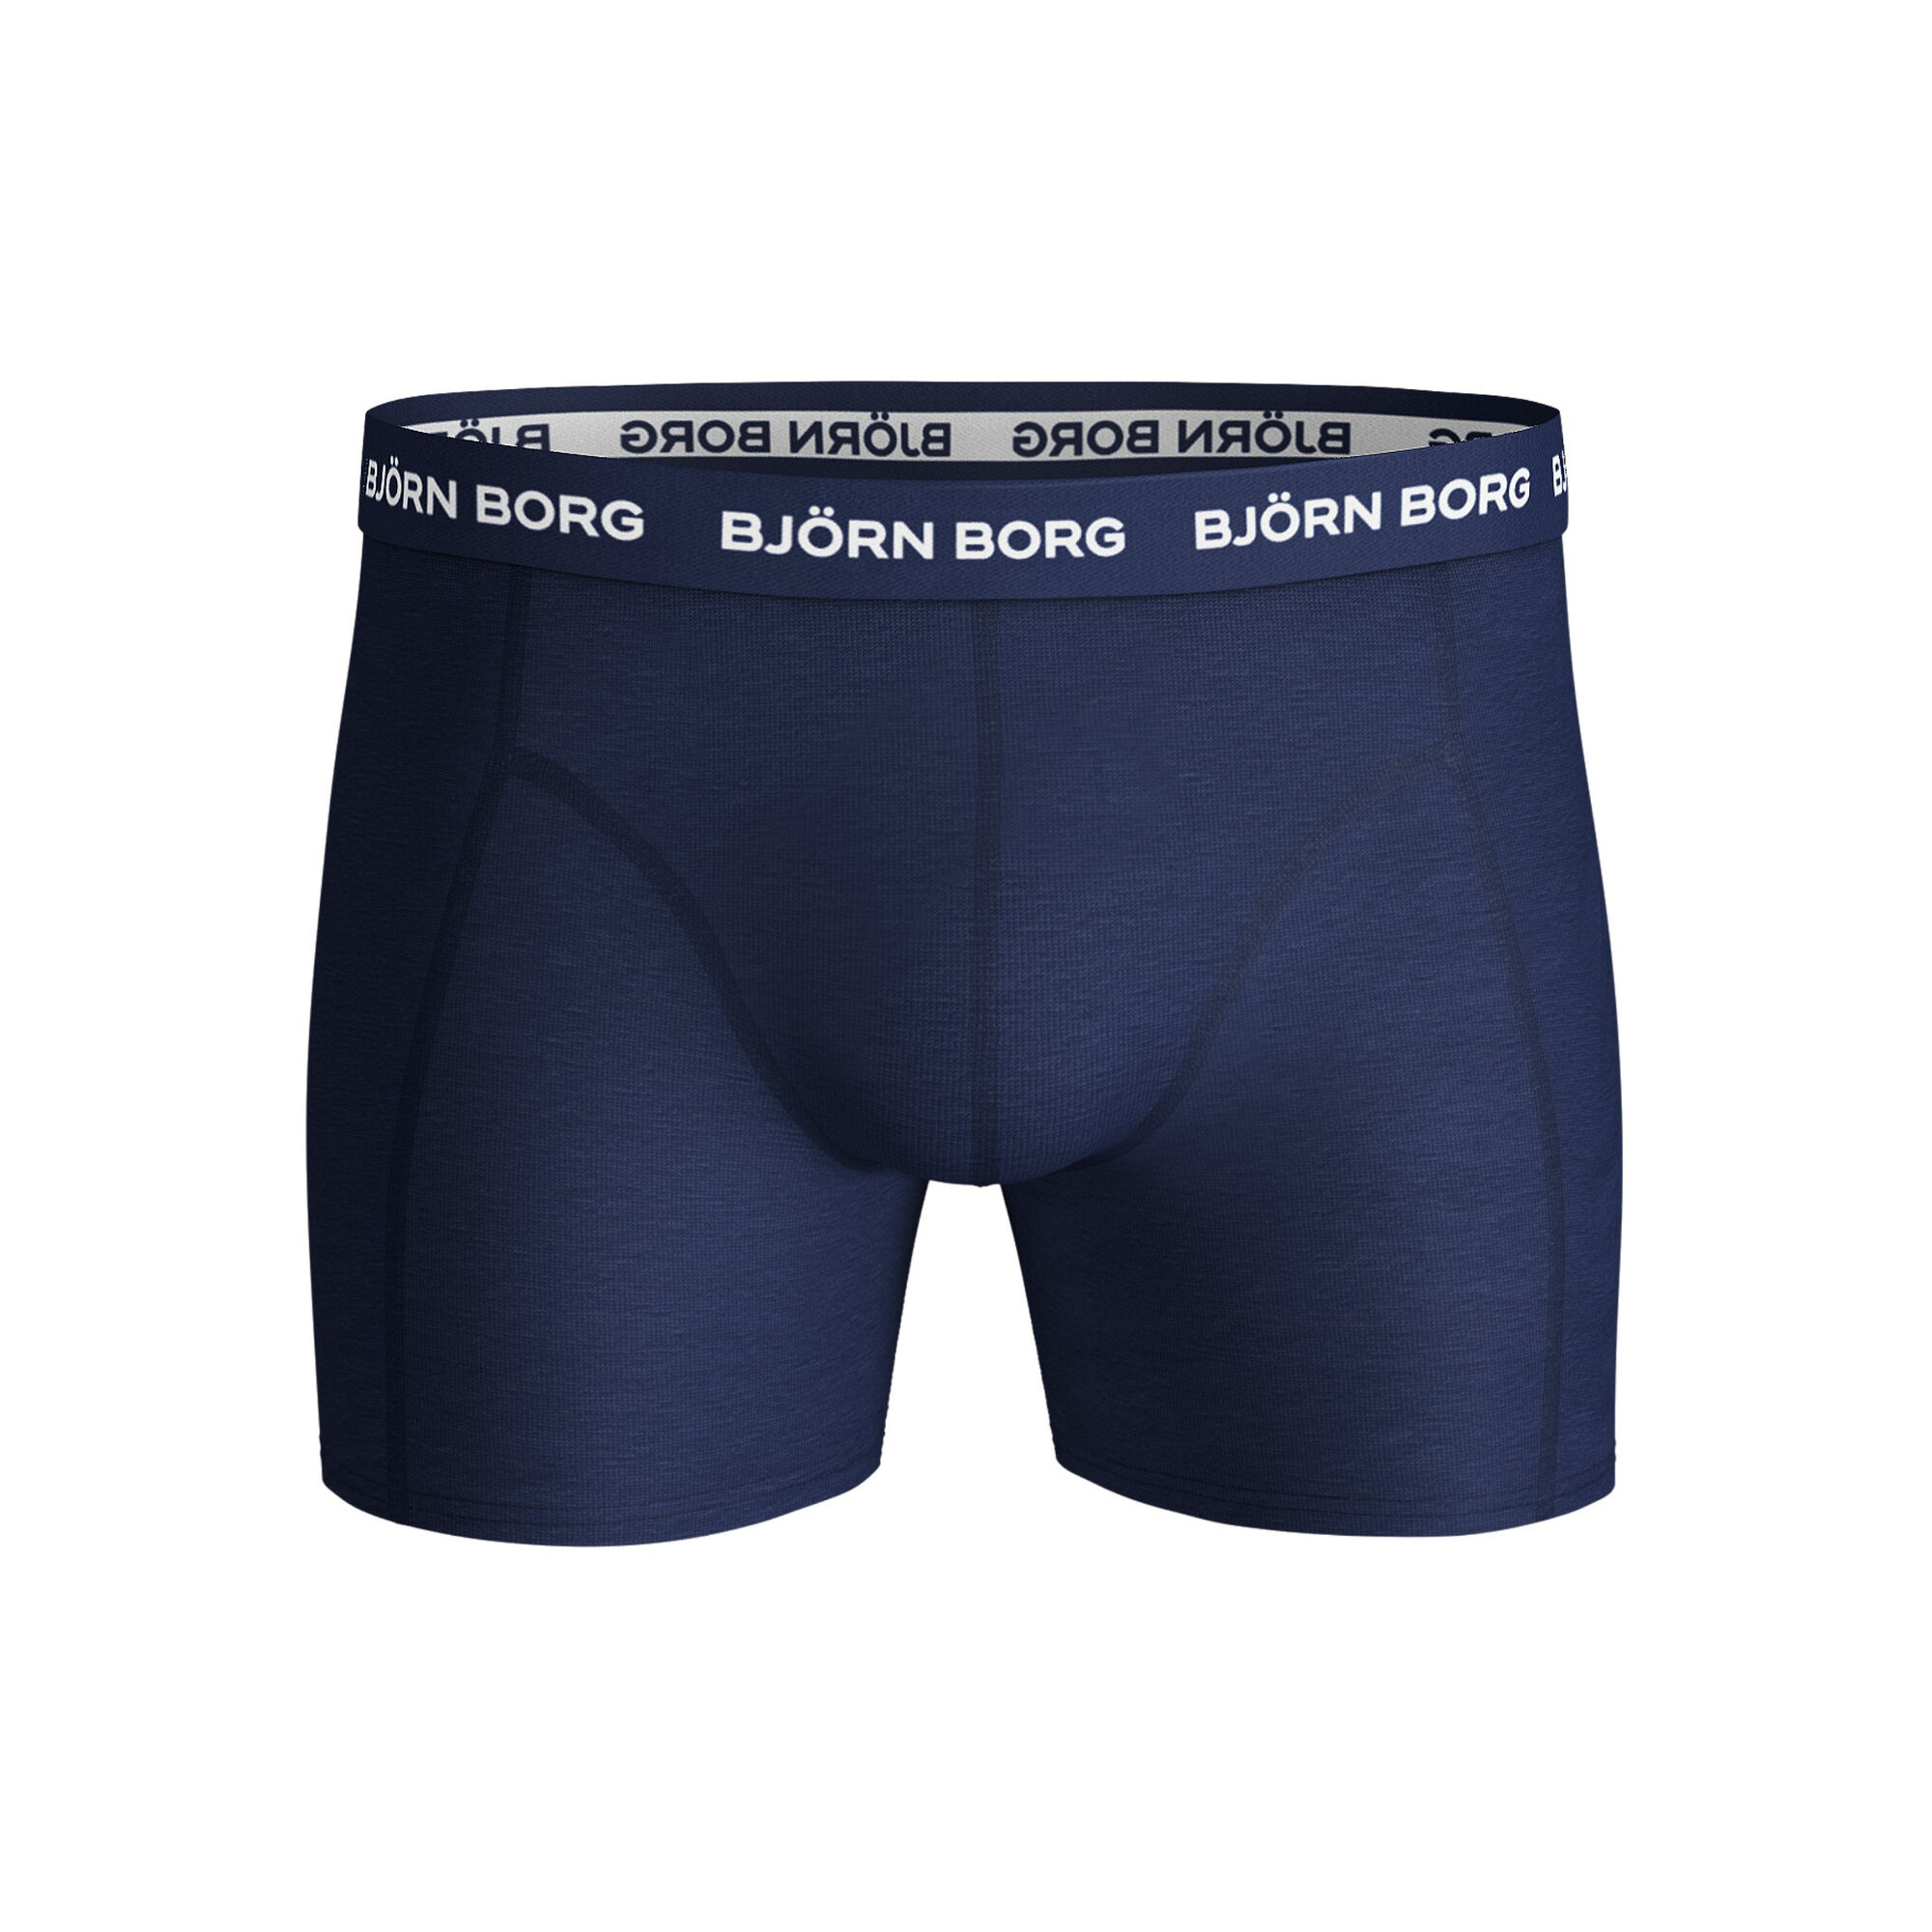 Björn Borg Solid Essential Boxer Shorts : Sammy - Black – Trunks and Boxers